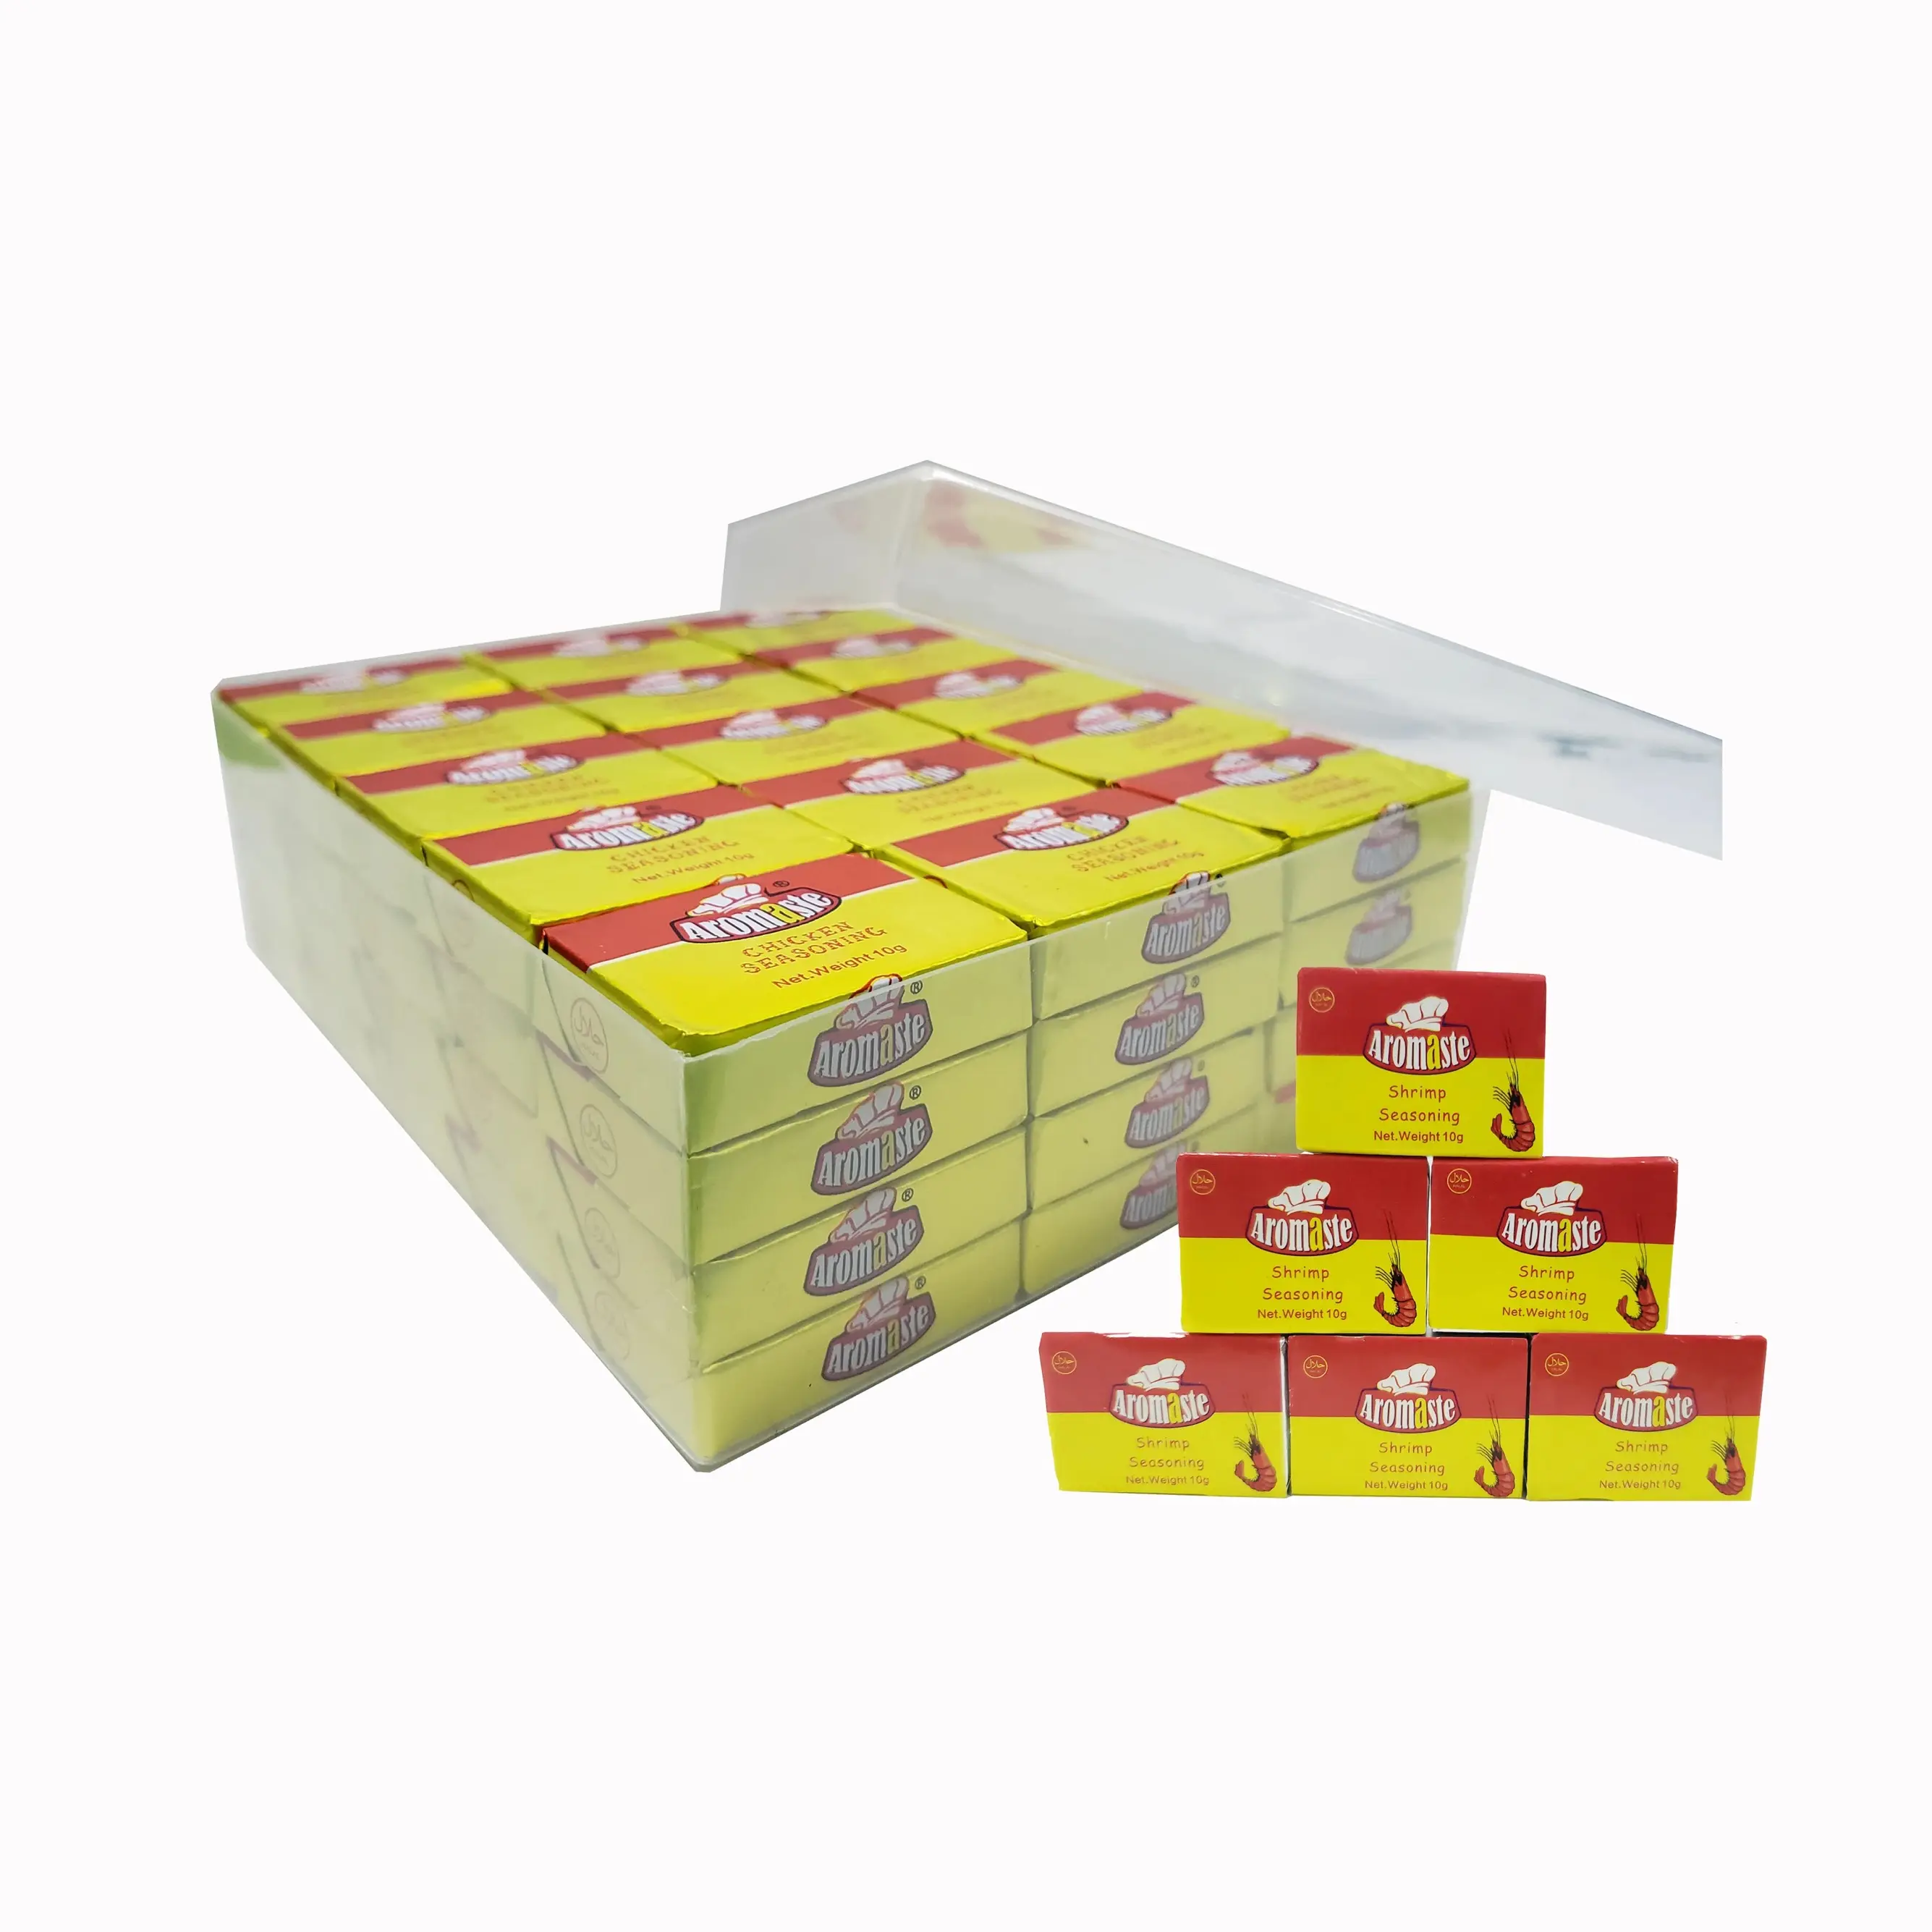 Maggie Cube, West Africa Popular Seasoning cube Made with Shrimp Flavor, x60 Count (pack/box) Bulk Supplier